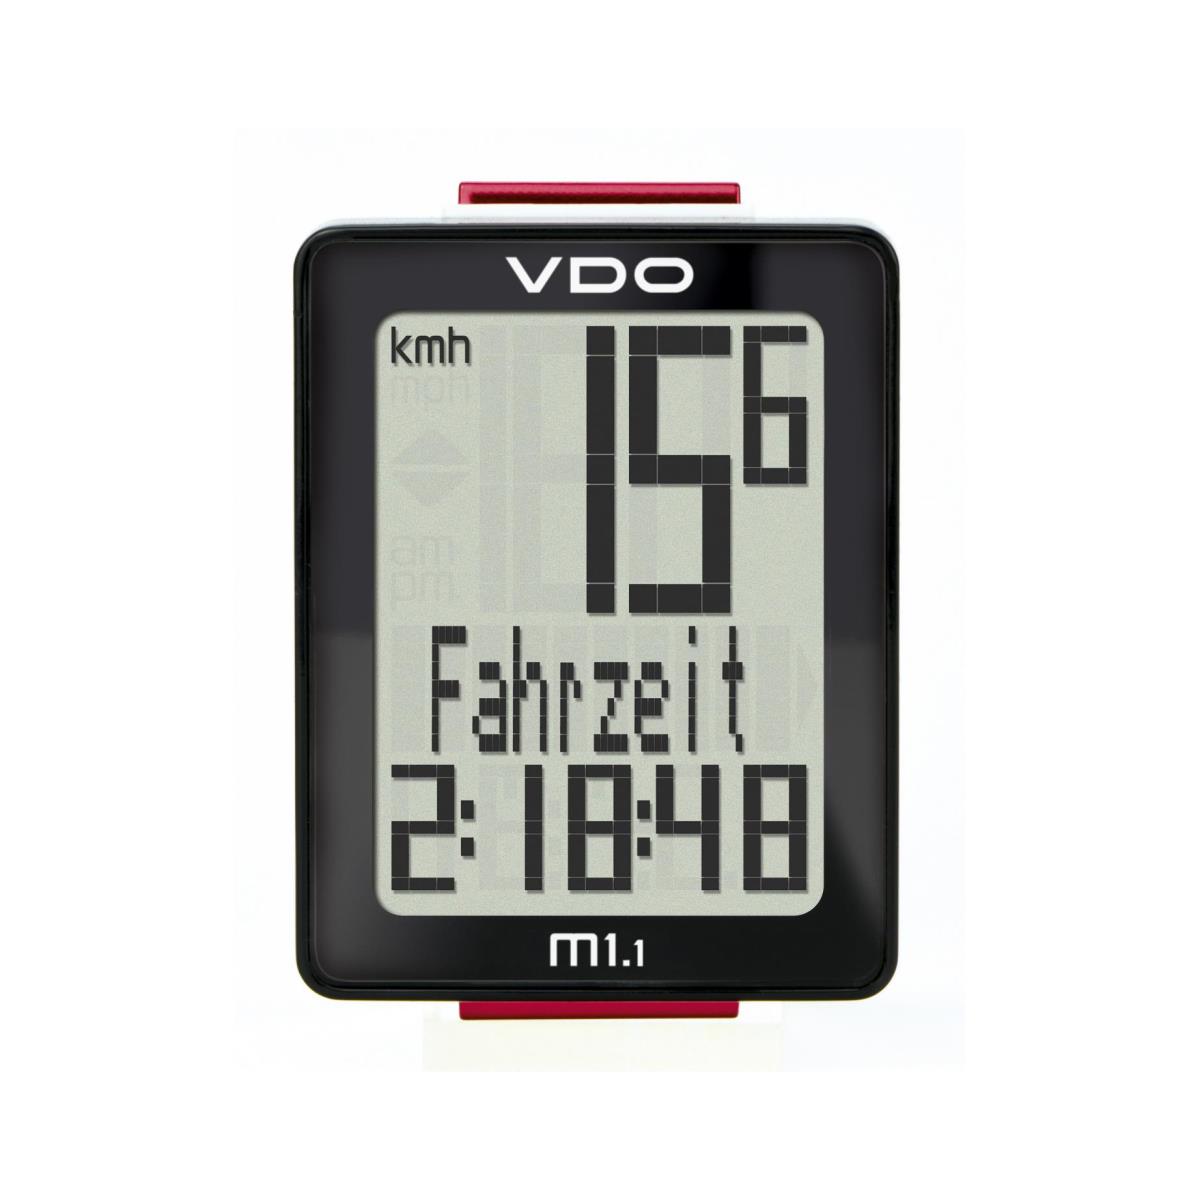 bike computer m1.1 wr 5 functions